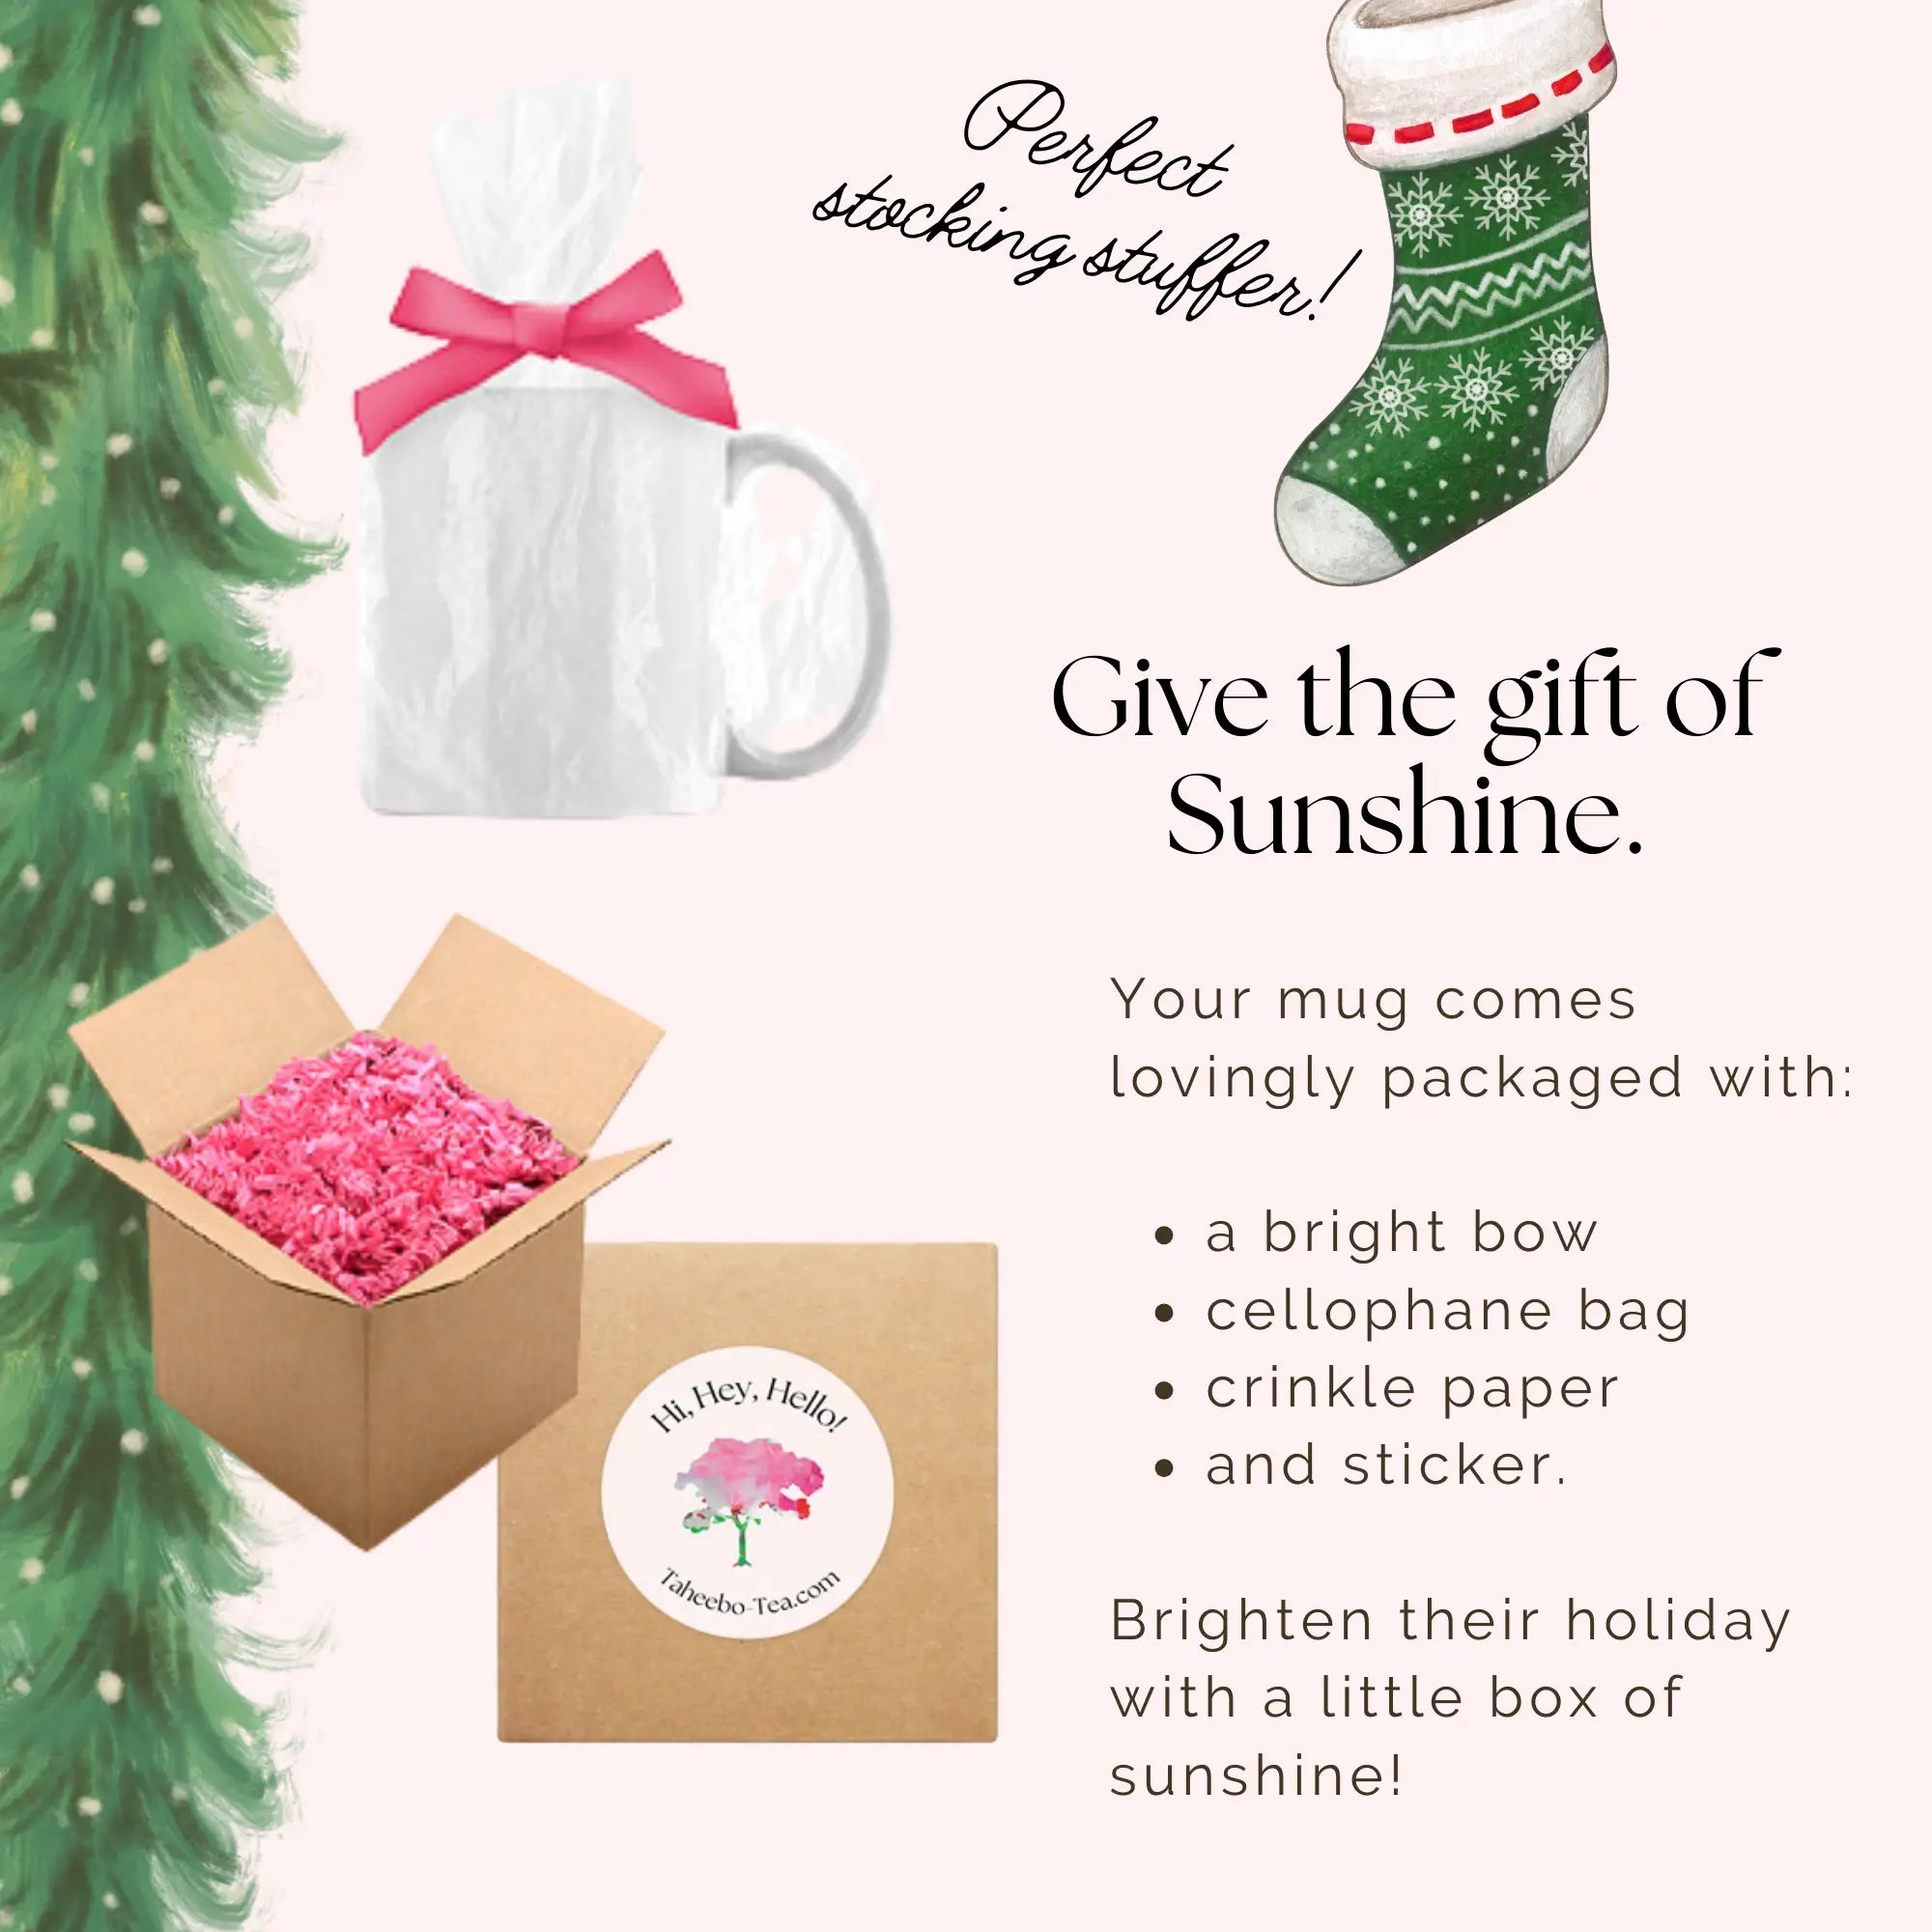 Taheebo Wellness Tea gift packaging - give the gift of sunshine!